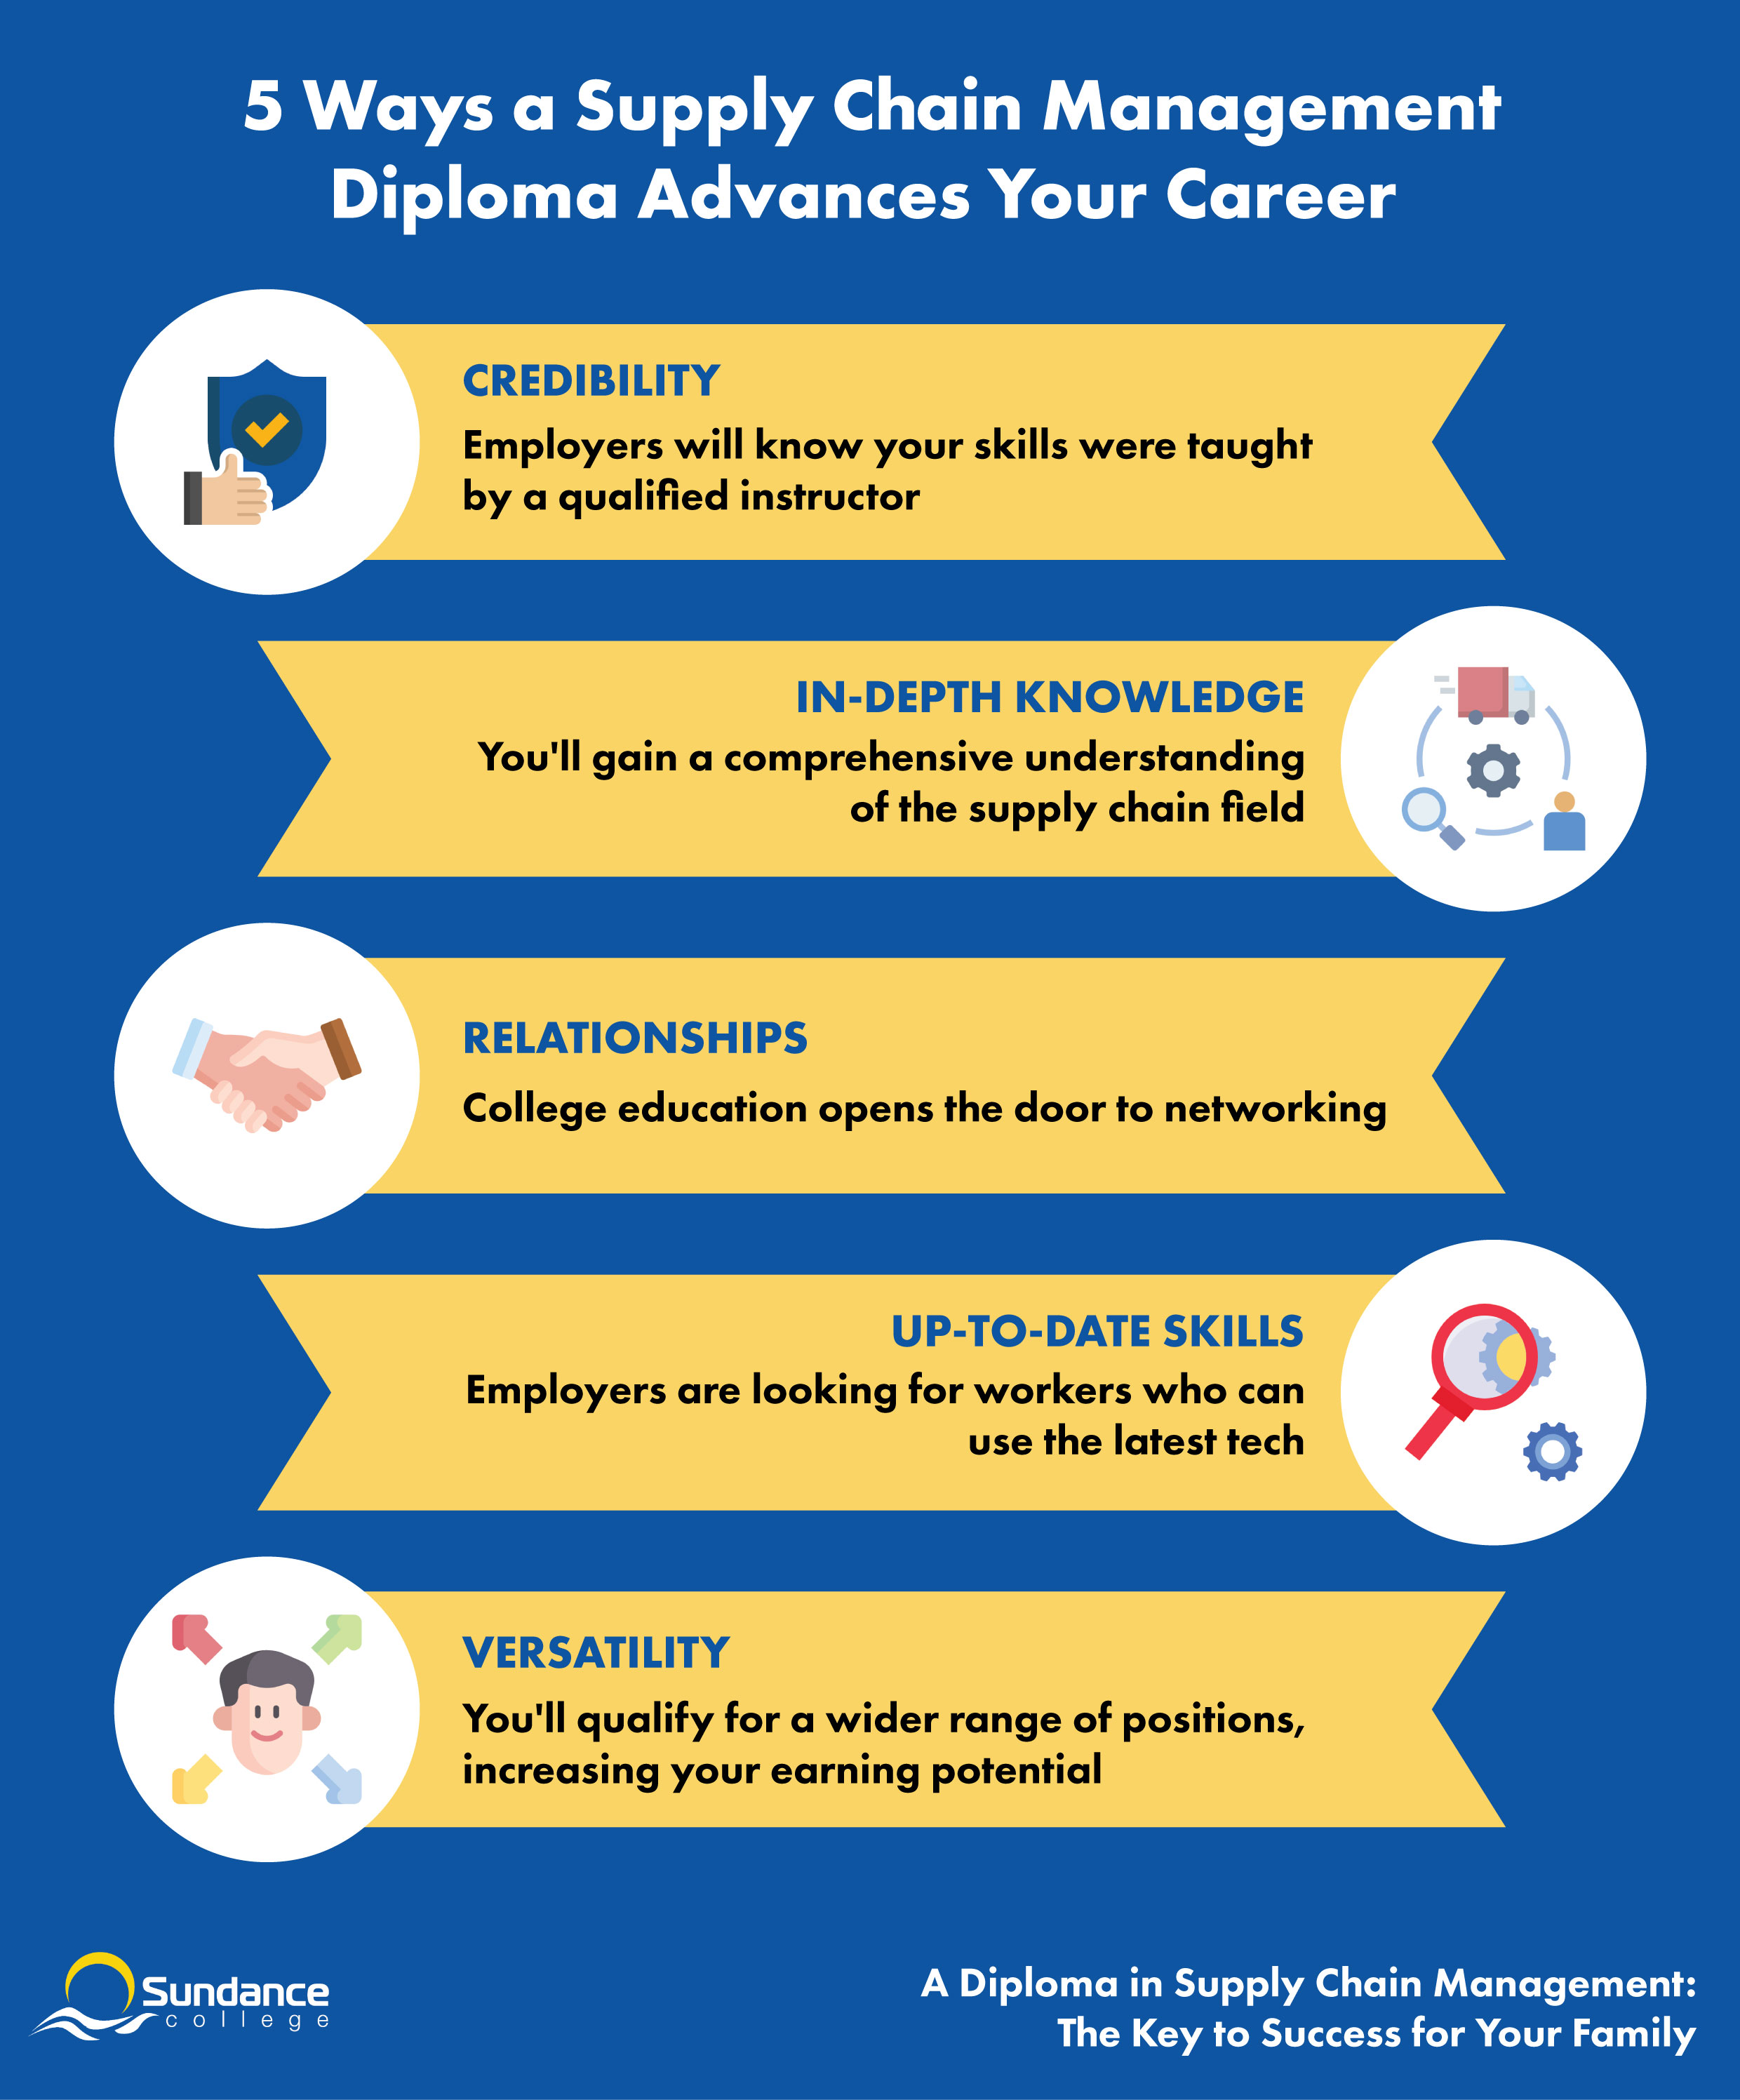 Infographic displaying 5 ways a Supply Chain Management Diploma Advances Your Career: Credibility, in-depth knowledge, relationships, up-to-date skills, versatility.